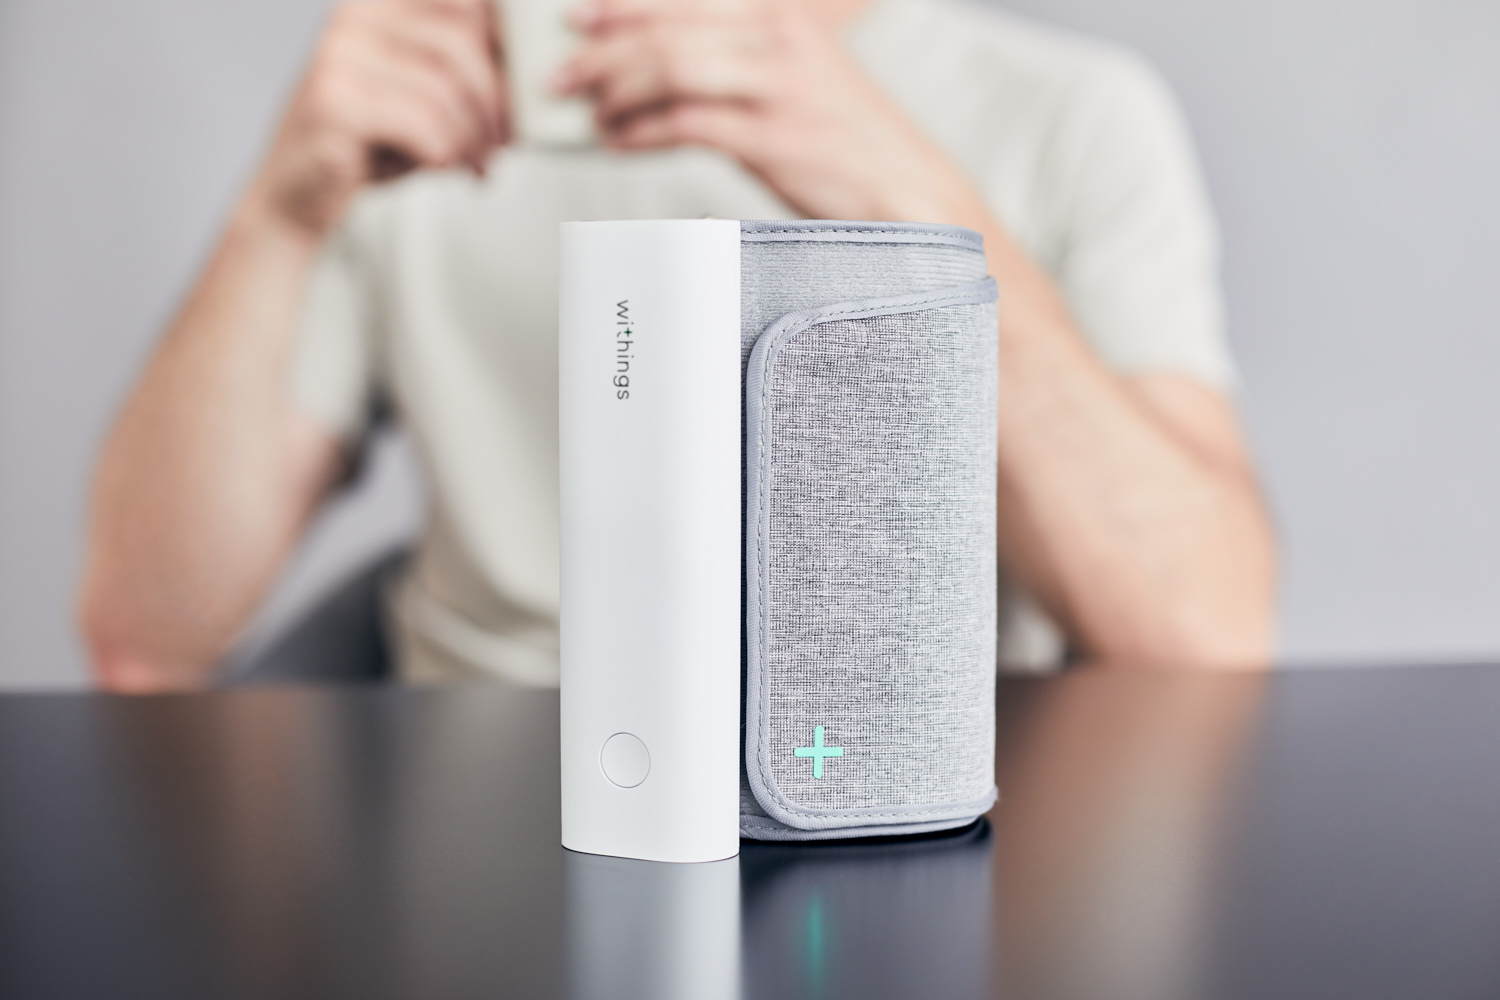 Portable blood pressure monitor: Withings BPM Connect Review - 9to5Mac